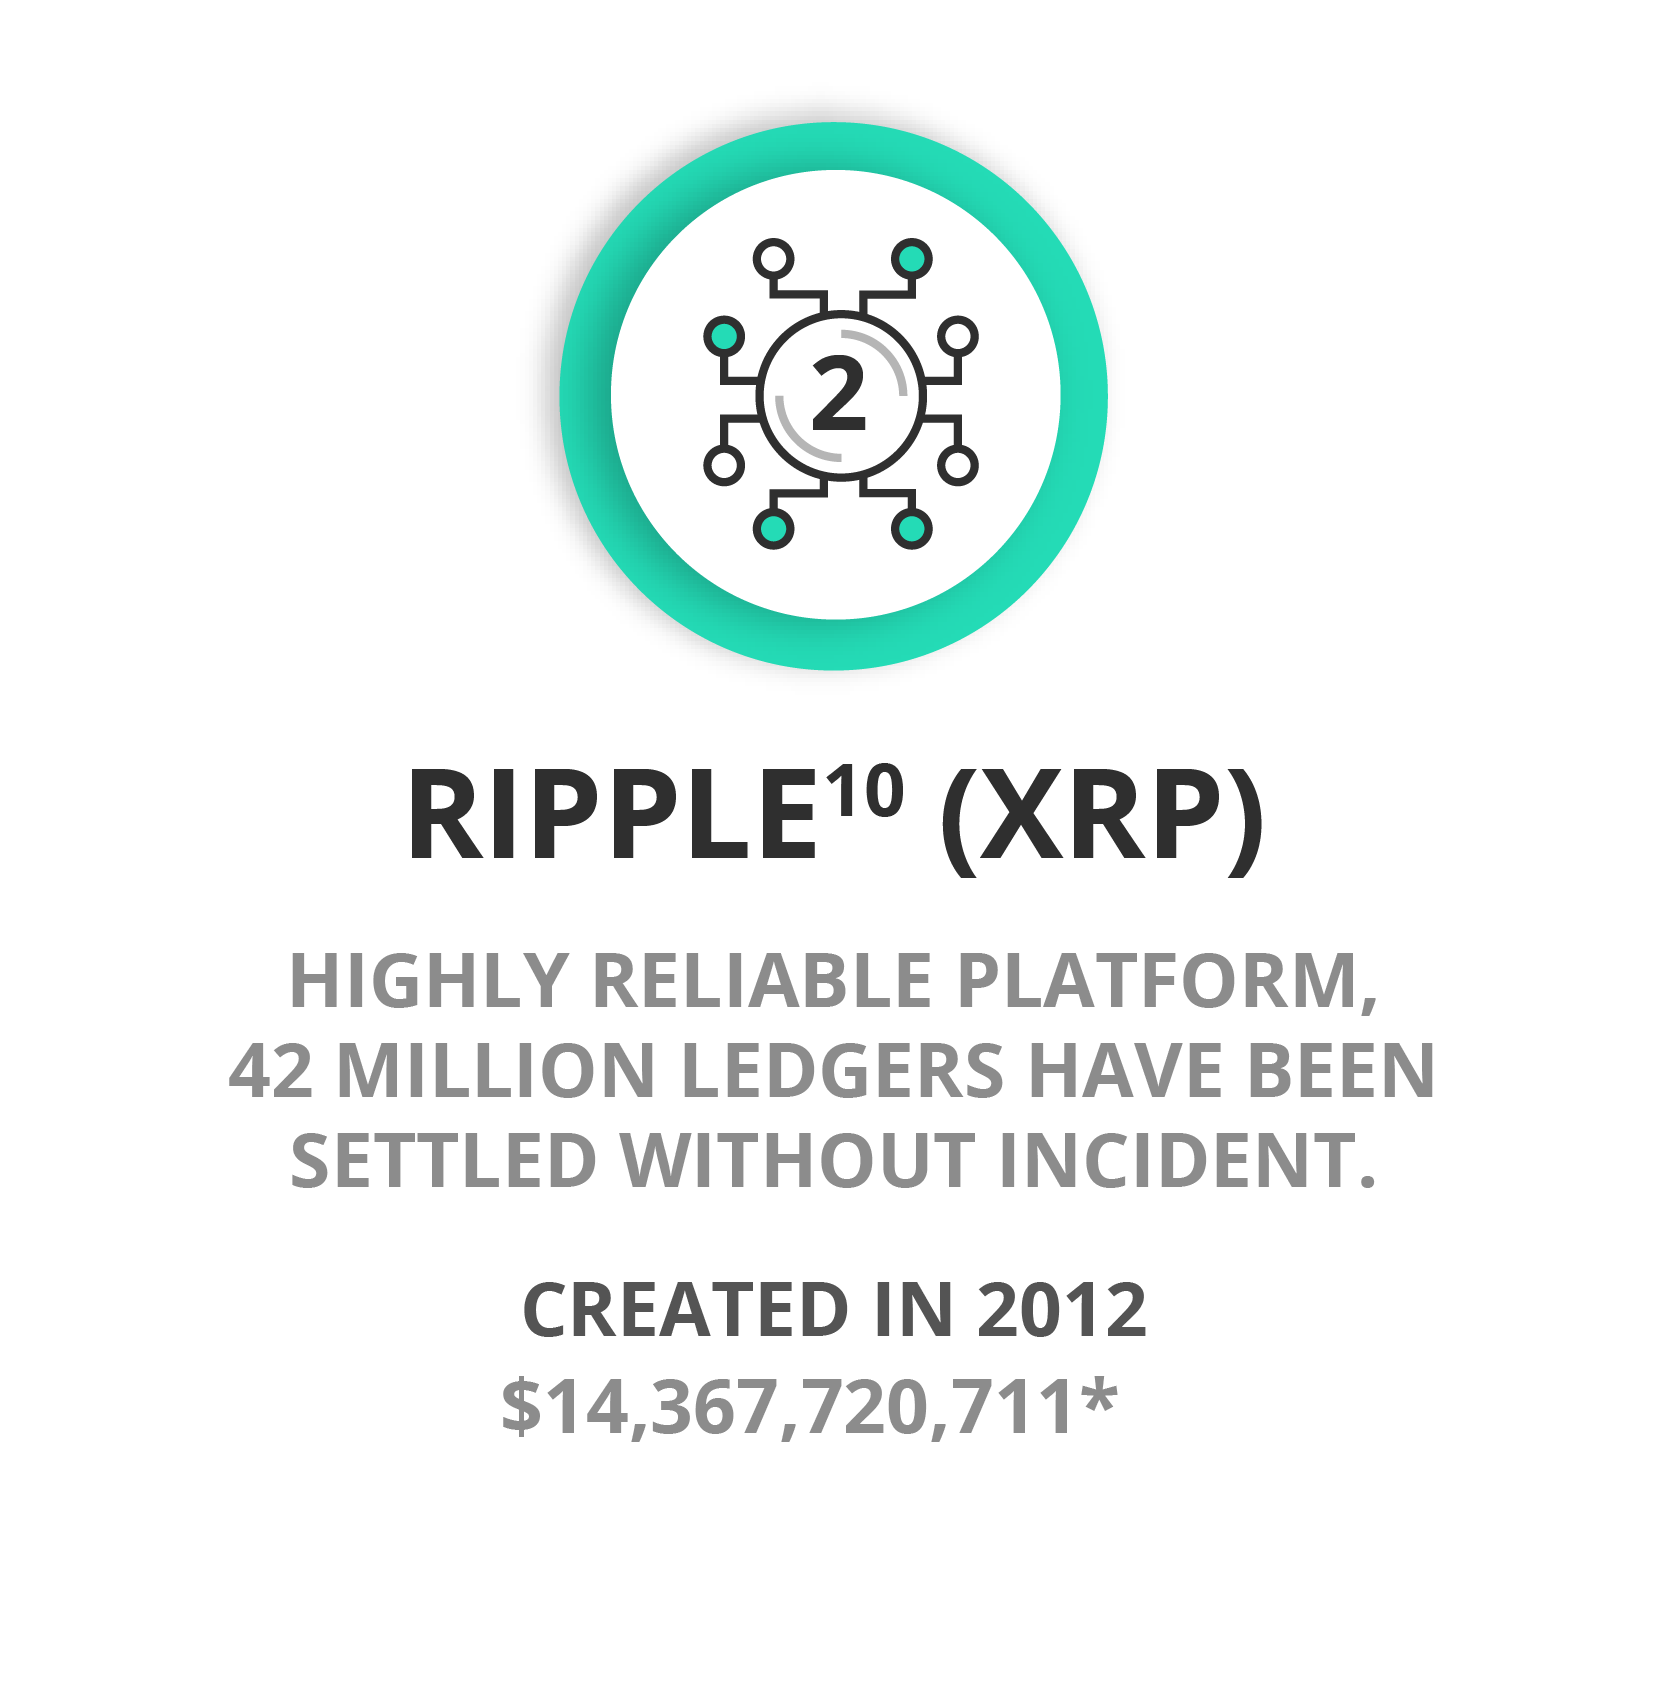 Ripple (XRP) cryptocurrency. Highly reliable platform, 42 million ledgers have been settled without incident